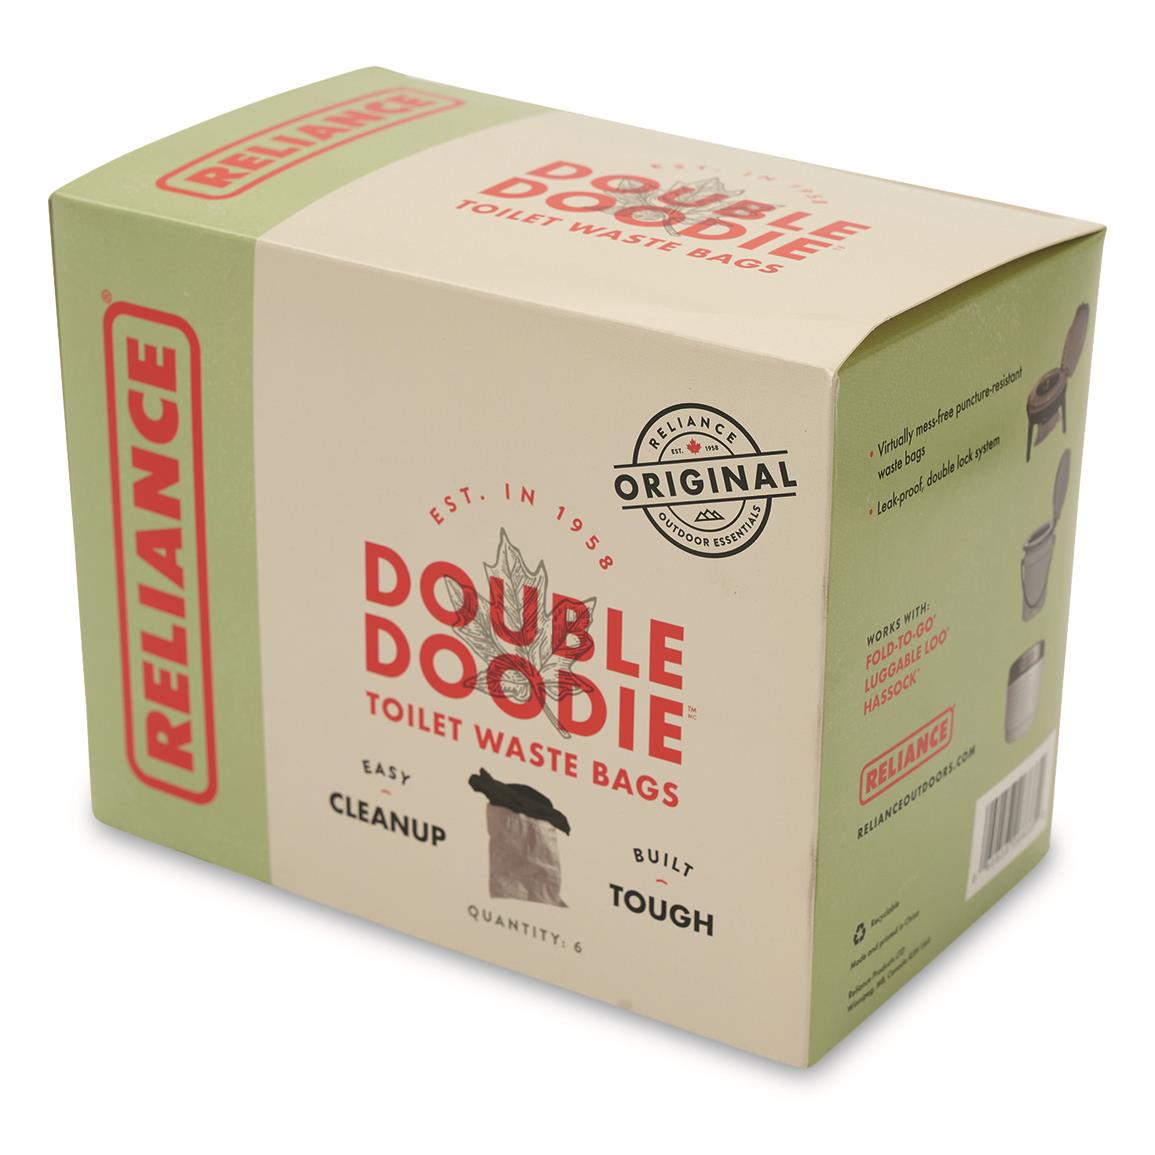 Reliance Double Doodie Toilet Waste Bags, 6 Pack